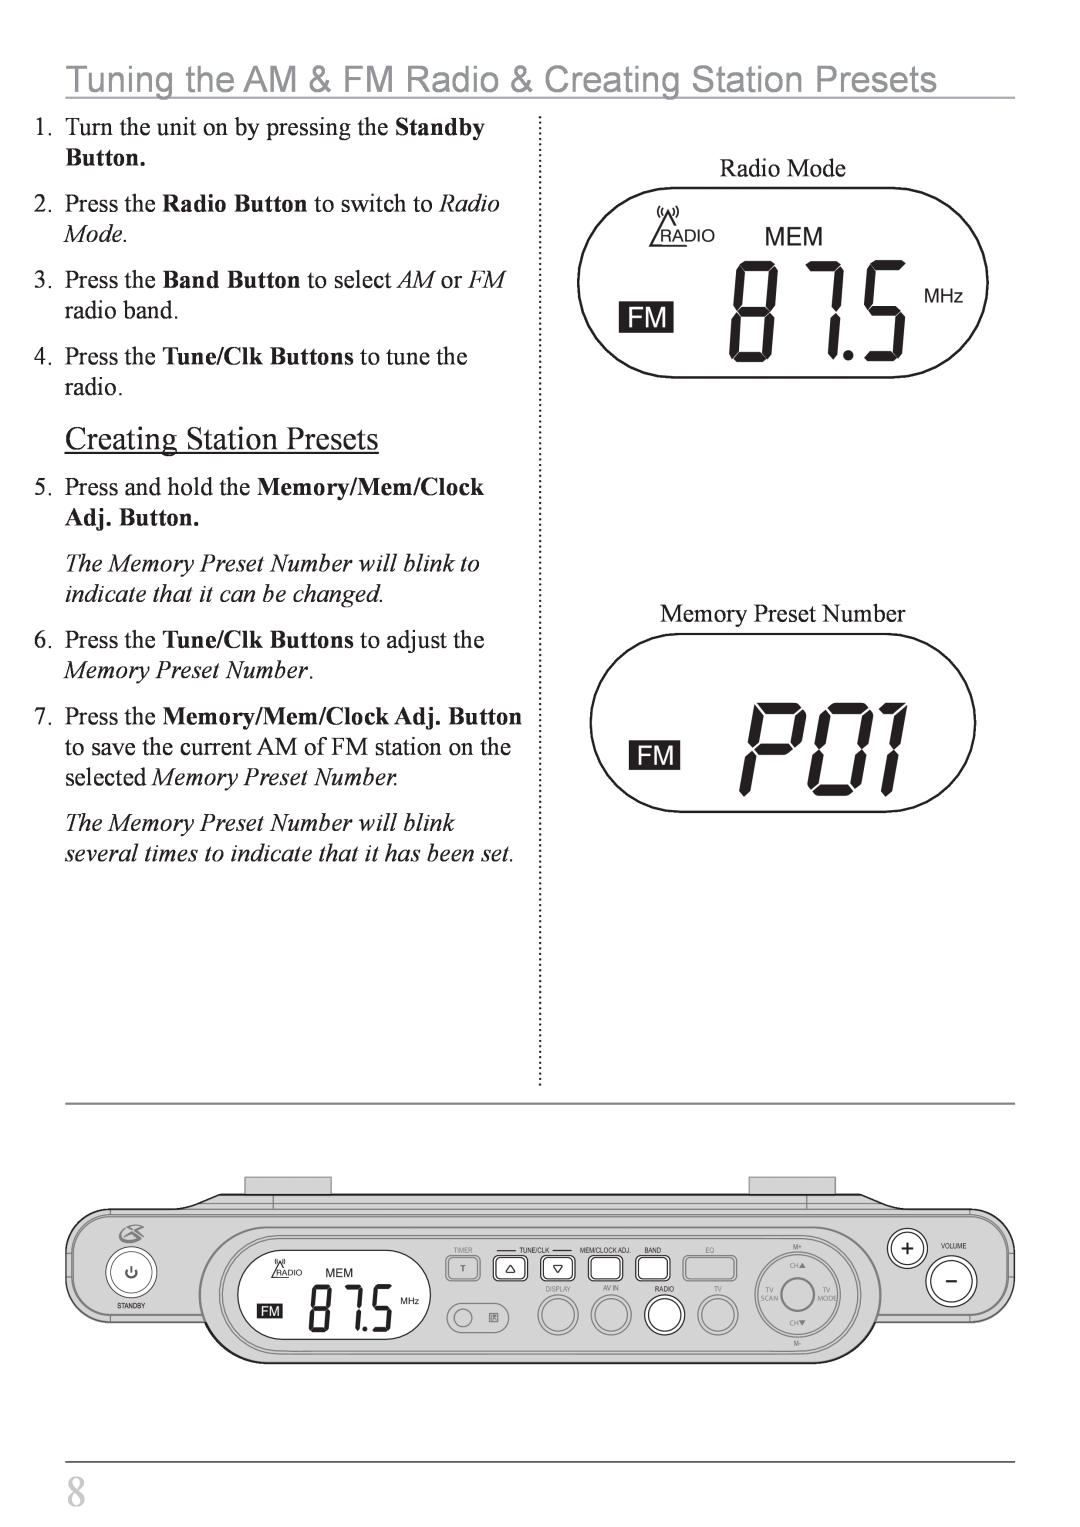 GPX KCL8807DT instruction manual Tuning the AM & FM Radio & Creating Station Presets, Adj. Button 